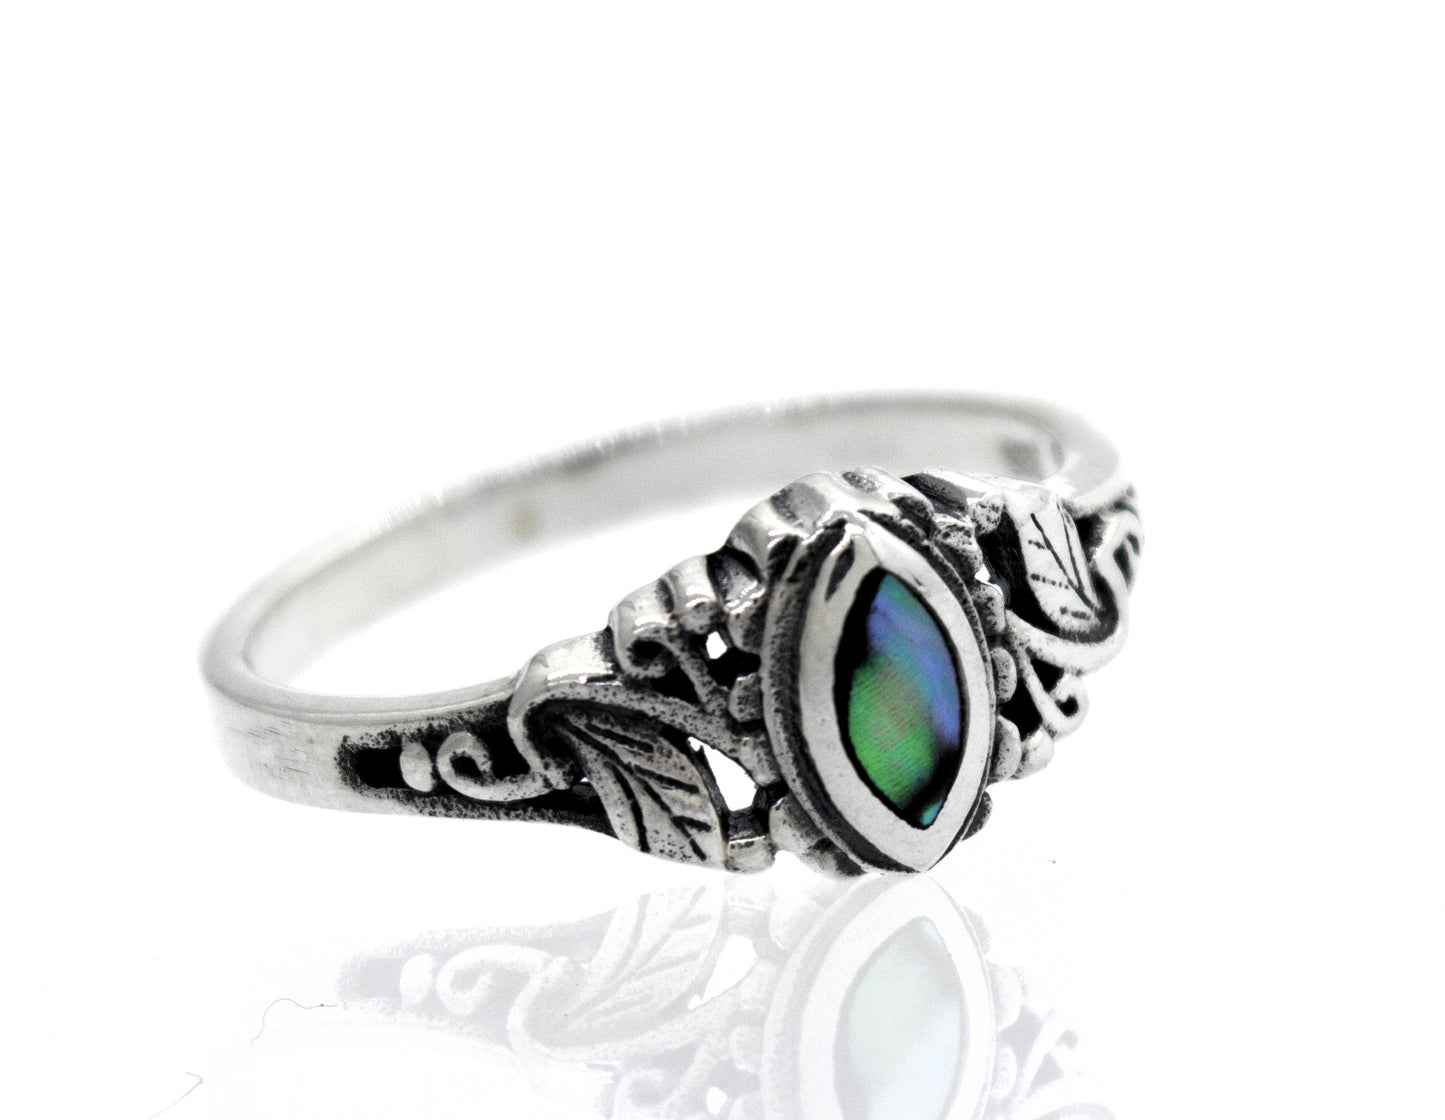 A nature-inspired, Dainty and Intricate Abalone Ring featuring a lustrous abalone stone by Super Silver.